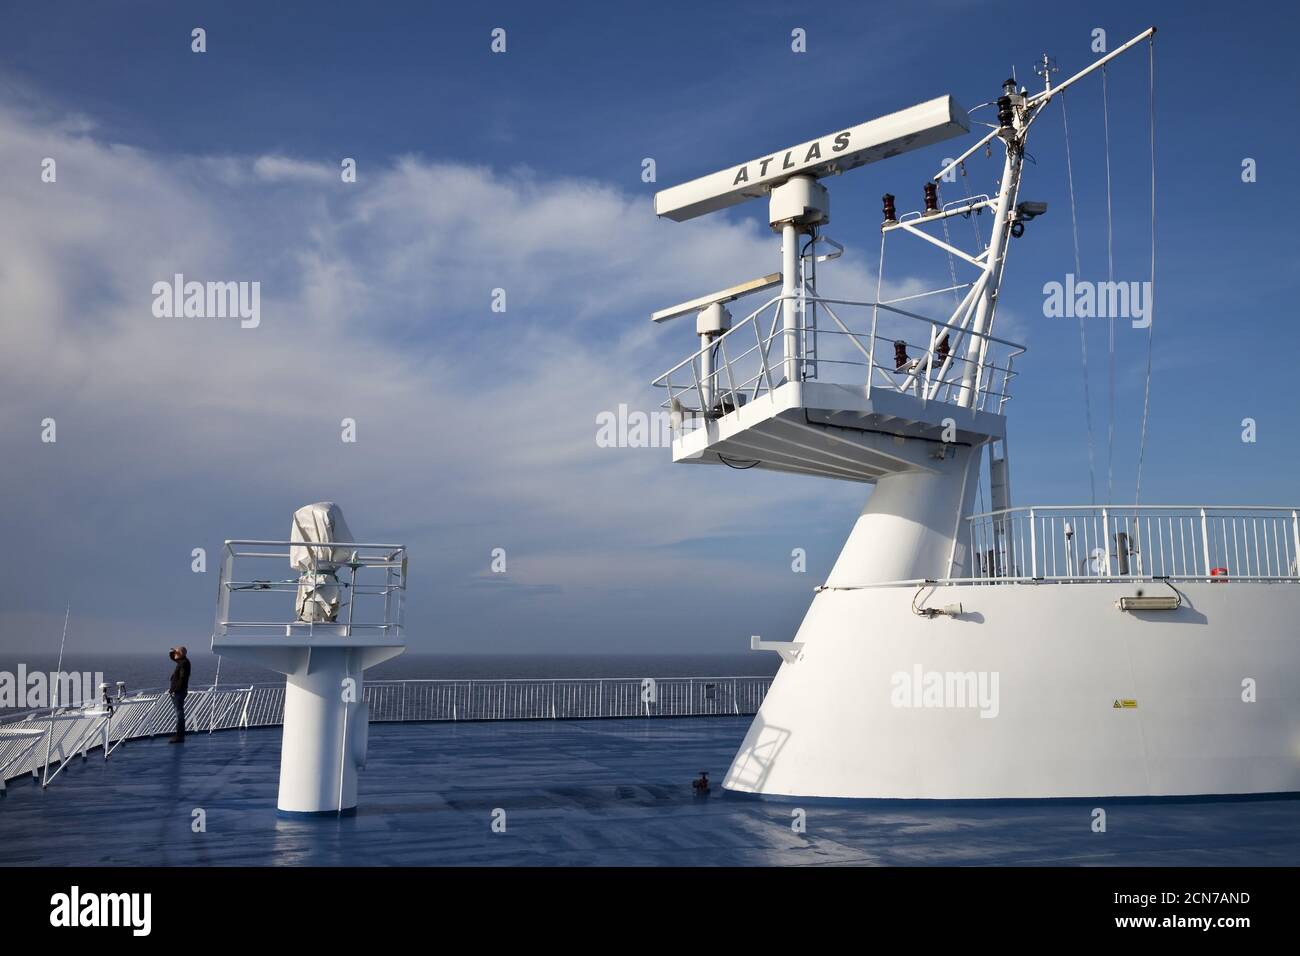 View of the deck of the Norroena ferry with marine electronics and the North Atlantic, Europe Stock Photo